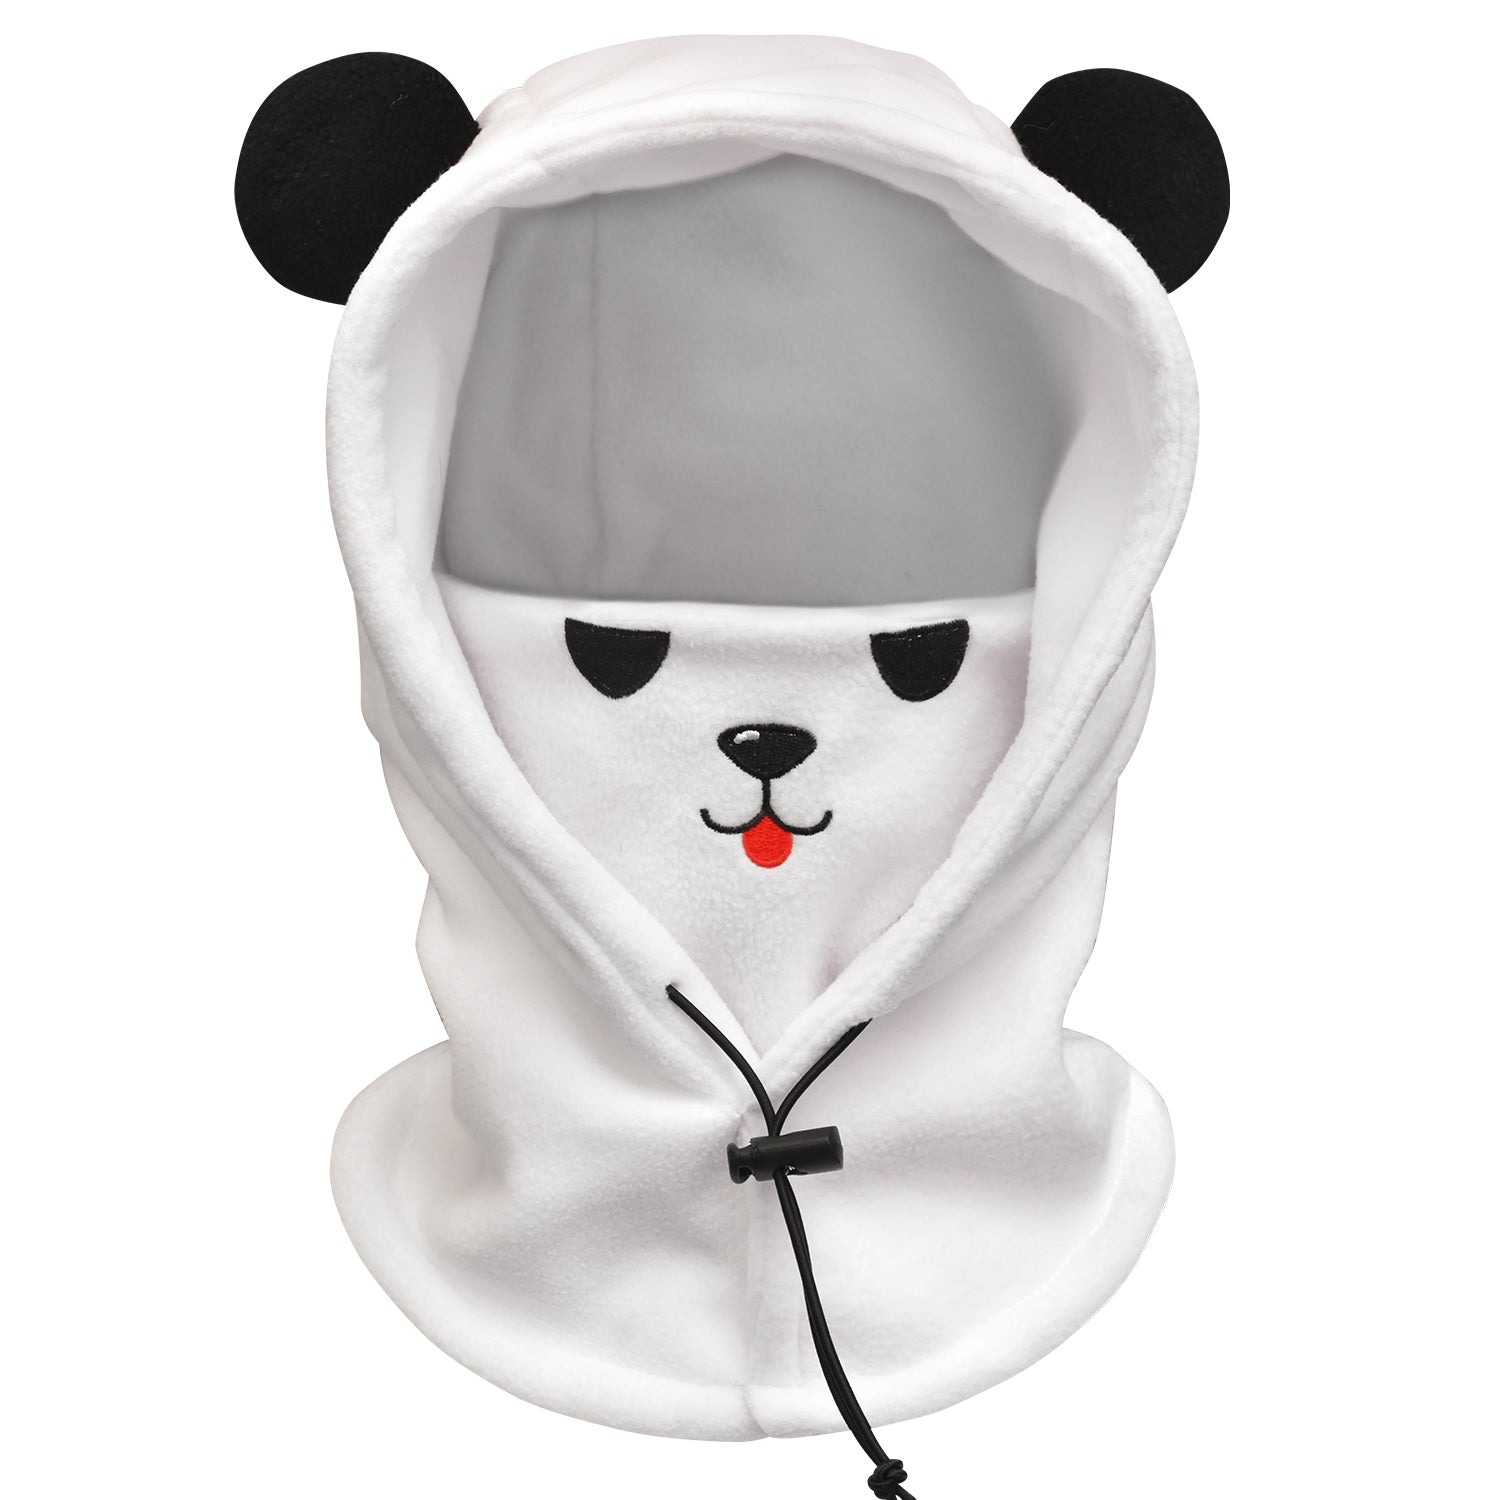 Kids Balaclava Ski Mask, Washable Fleece Winter Hat with Face Cover for Windproof, Panda